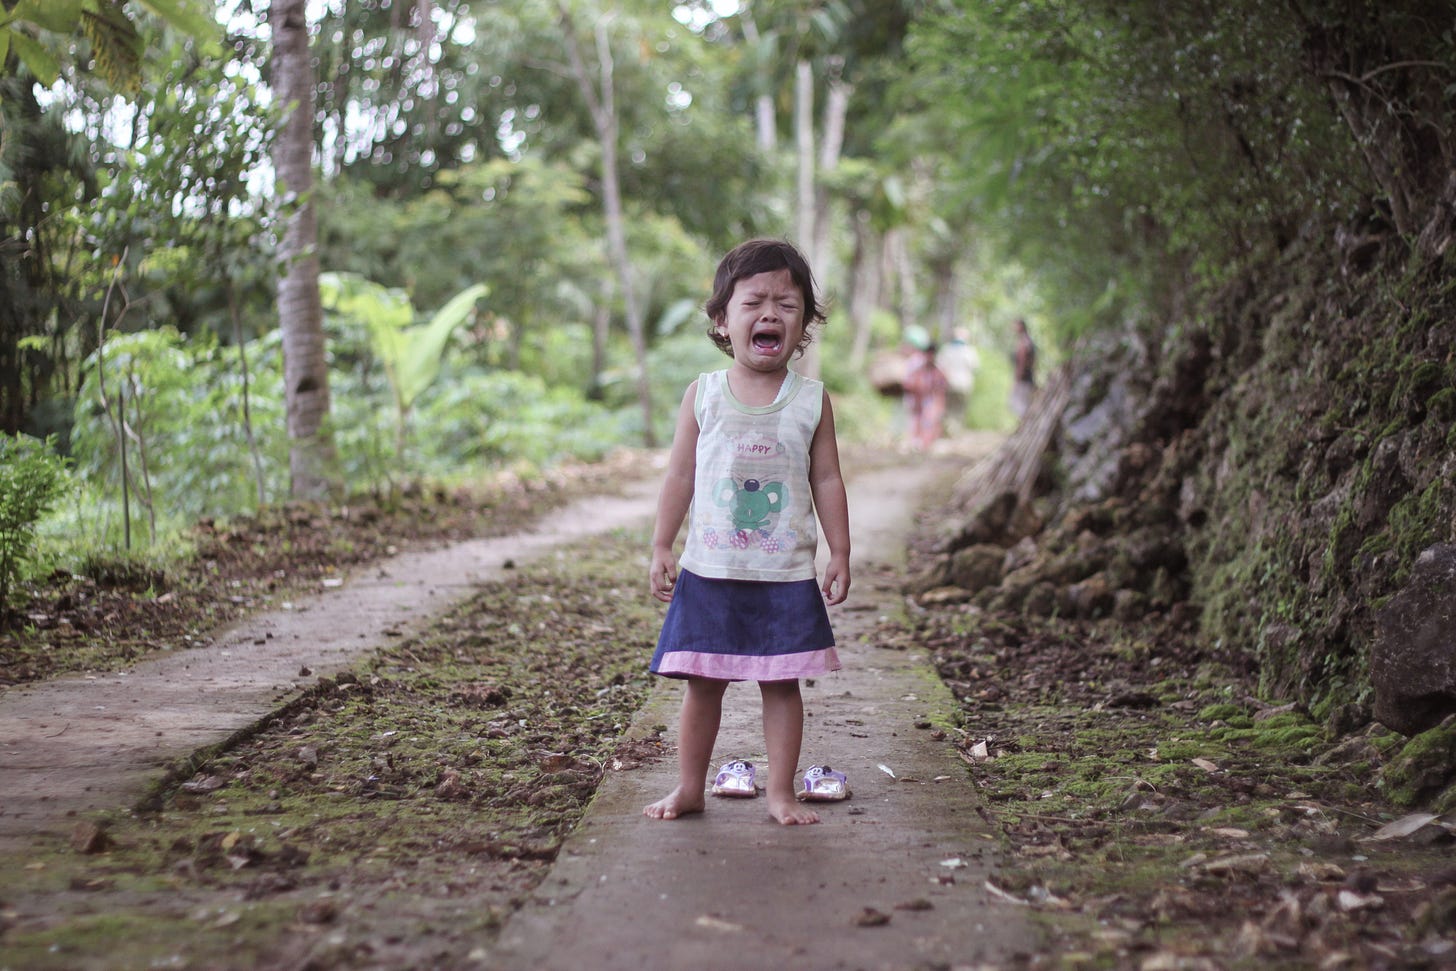 A young child barefoot on a path wearing a shirt that says 'happy' while open-mouthed and obviously screaming mid-meltdown.